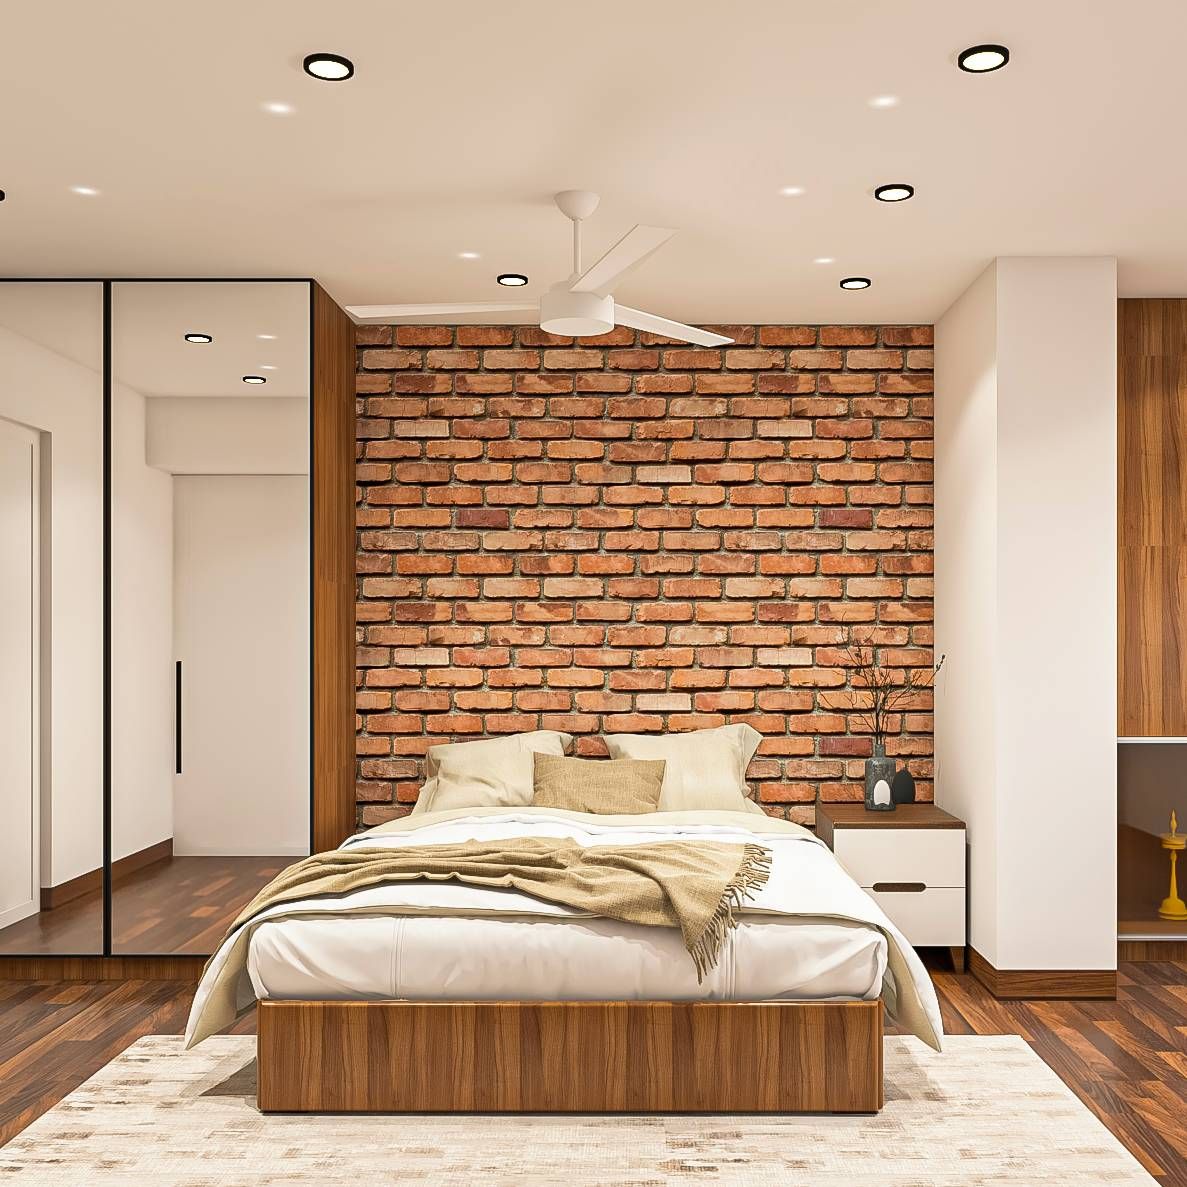 Modern Master Bedroom Design With A Textured Wall